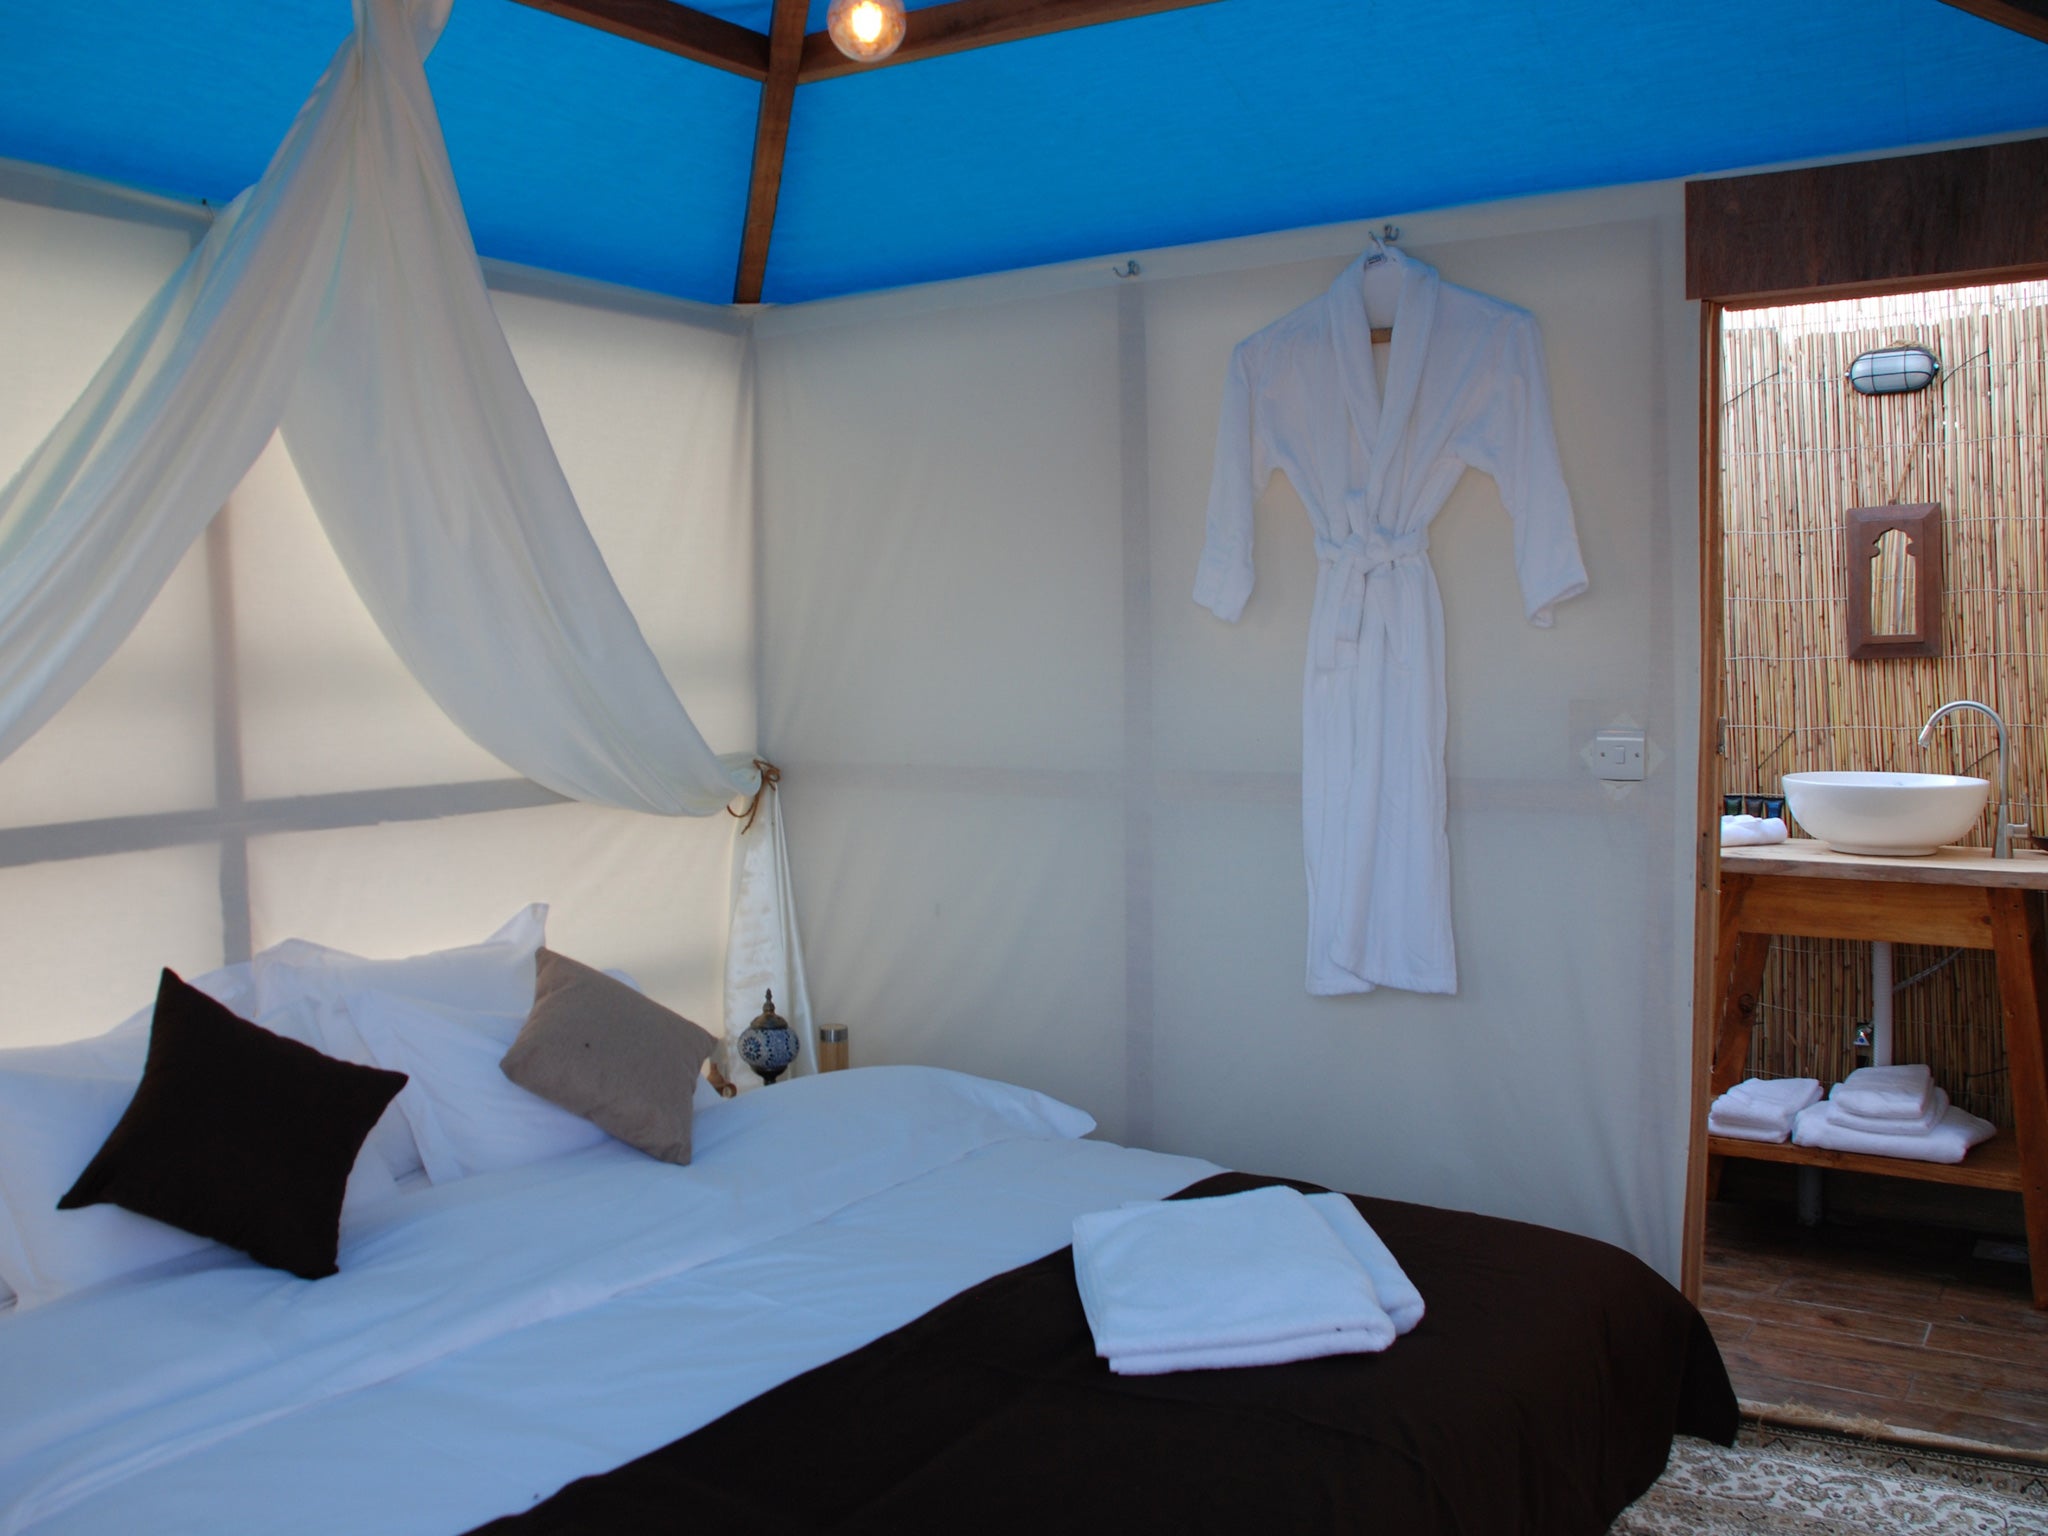 Inside, the cabins have a few luxurious touches and Bedouin influences